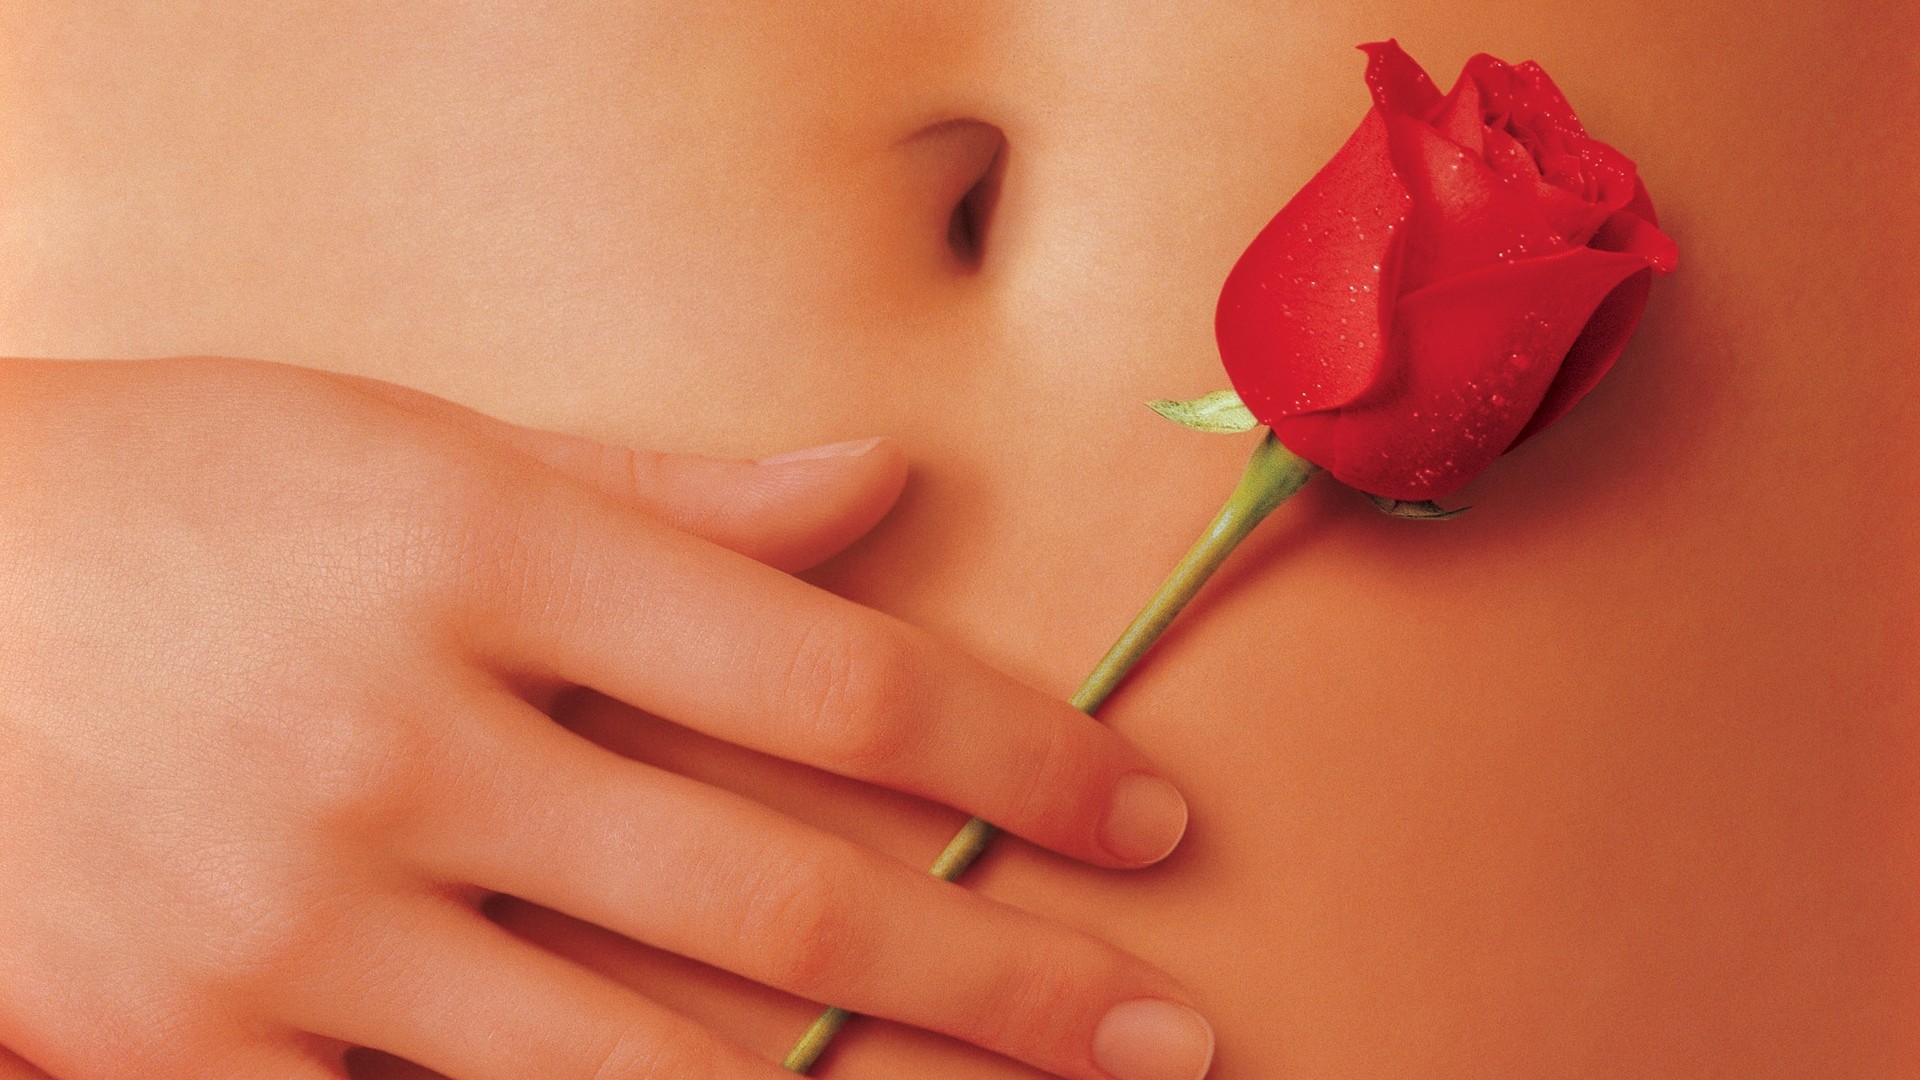 People 1920x1080 American Beauty movies hands rose flowers belly button red flowers belly plants women